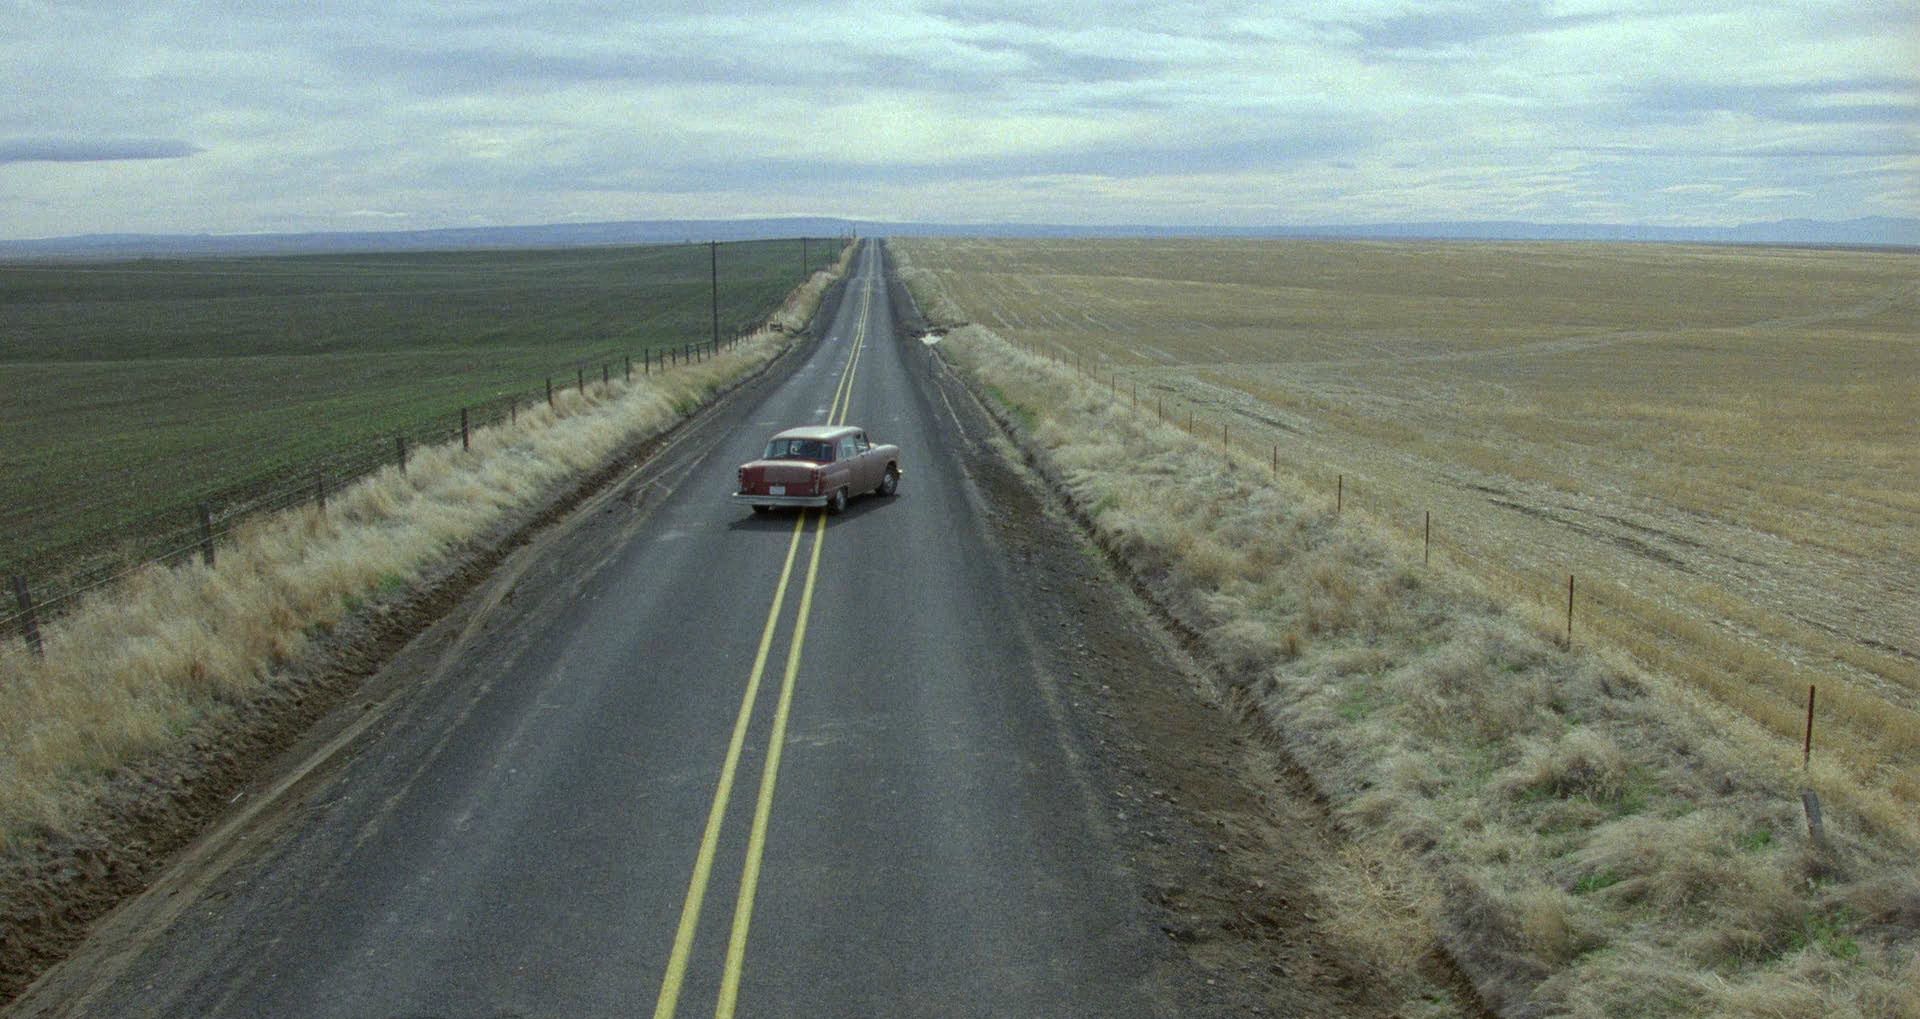 MY OWN PRIVATE IDAHO (1991)